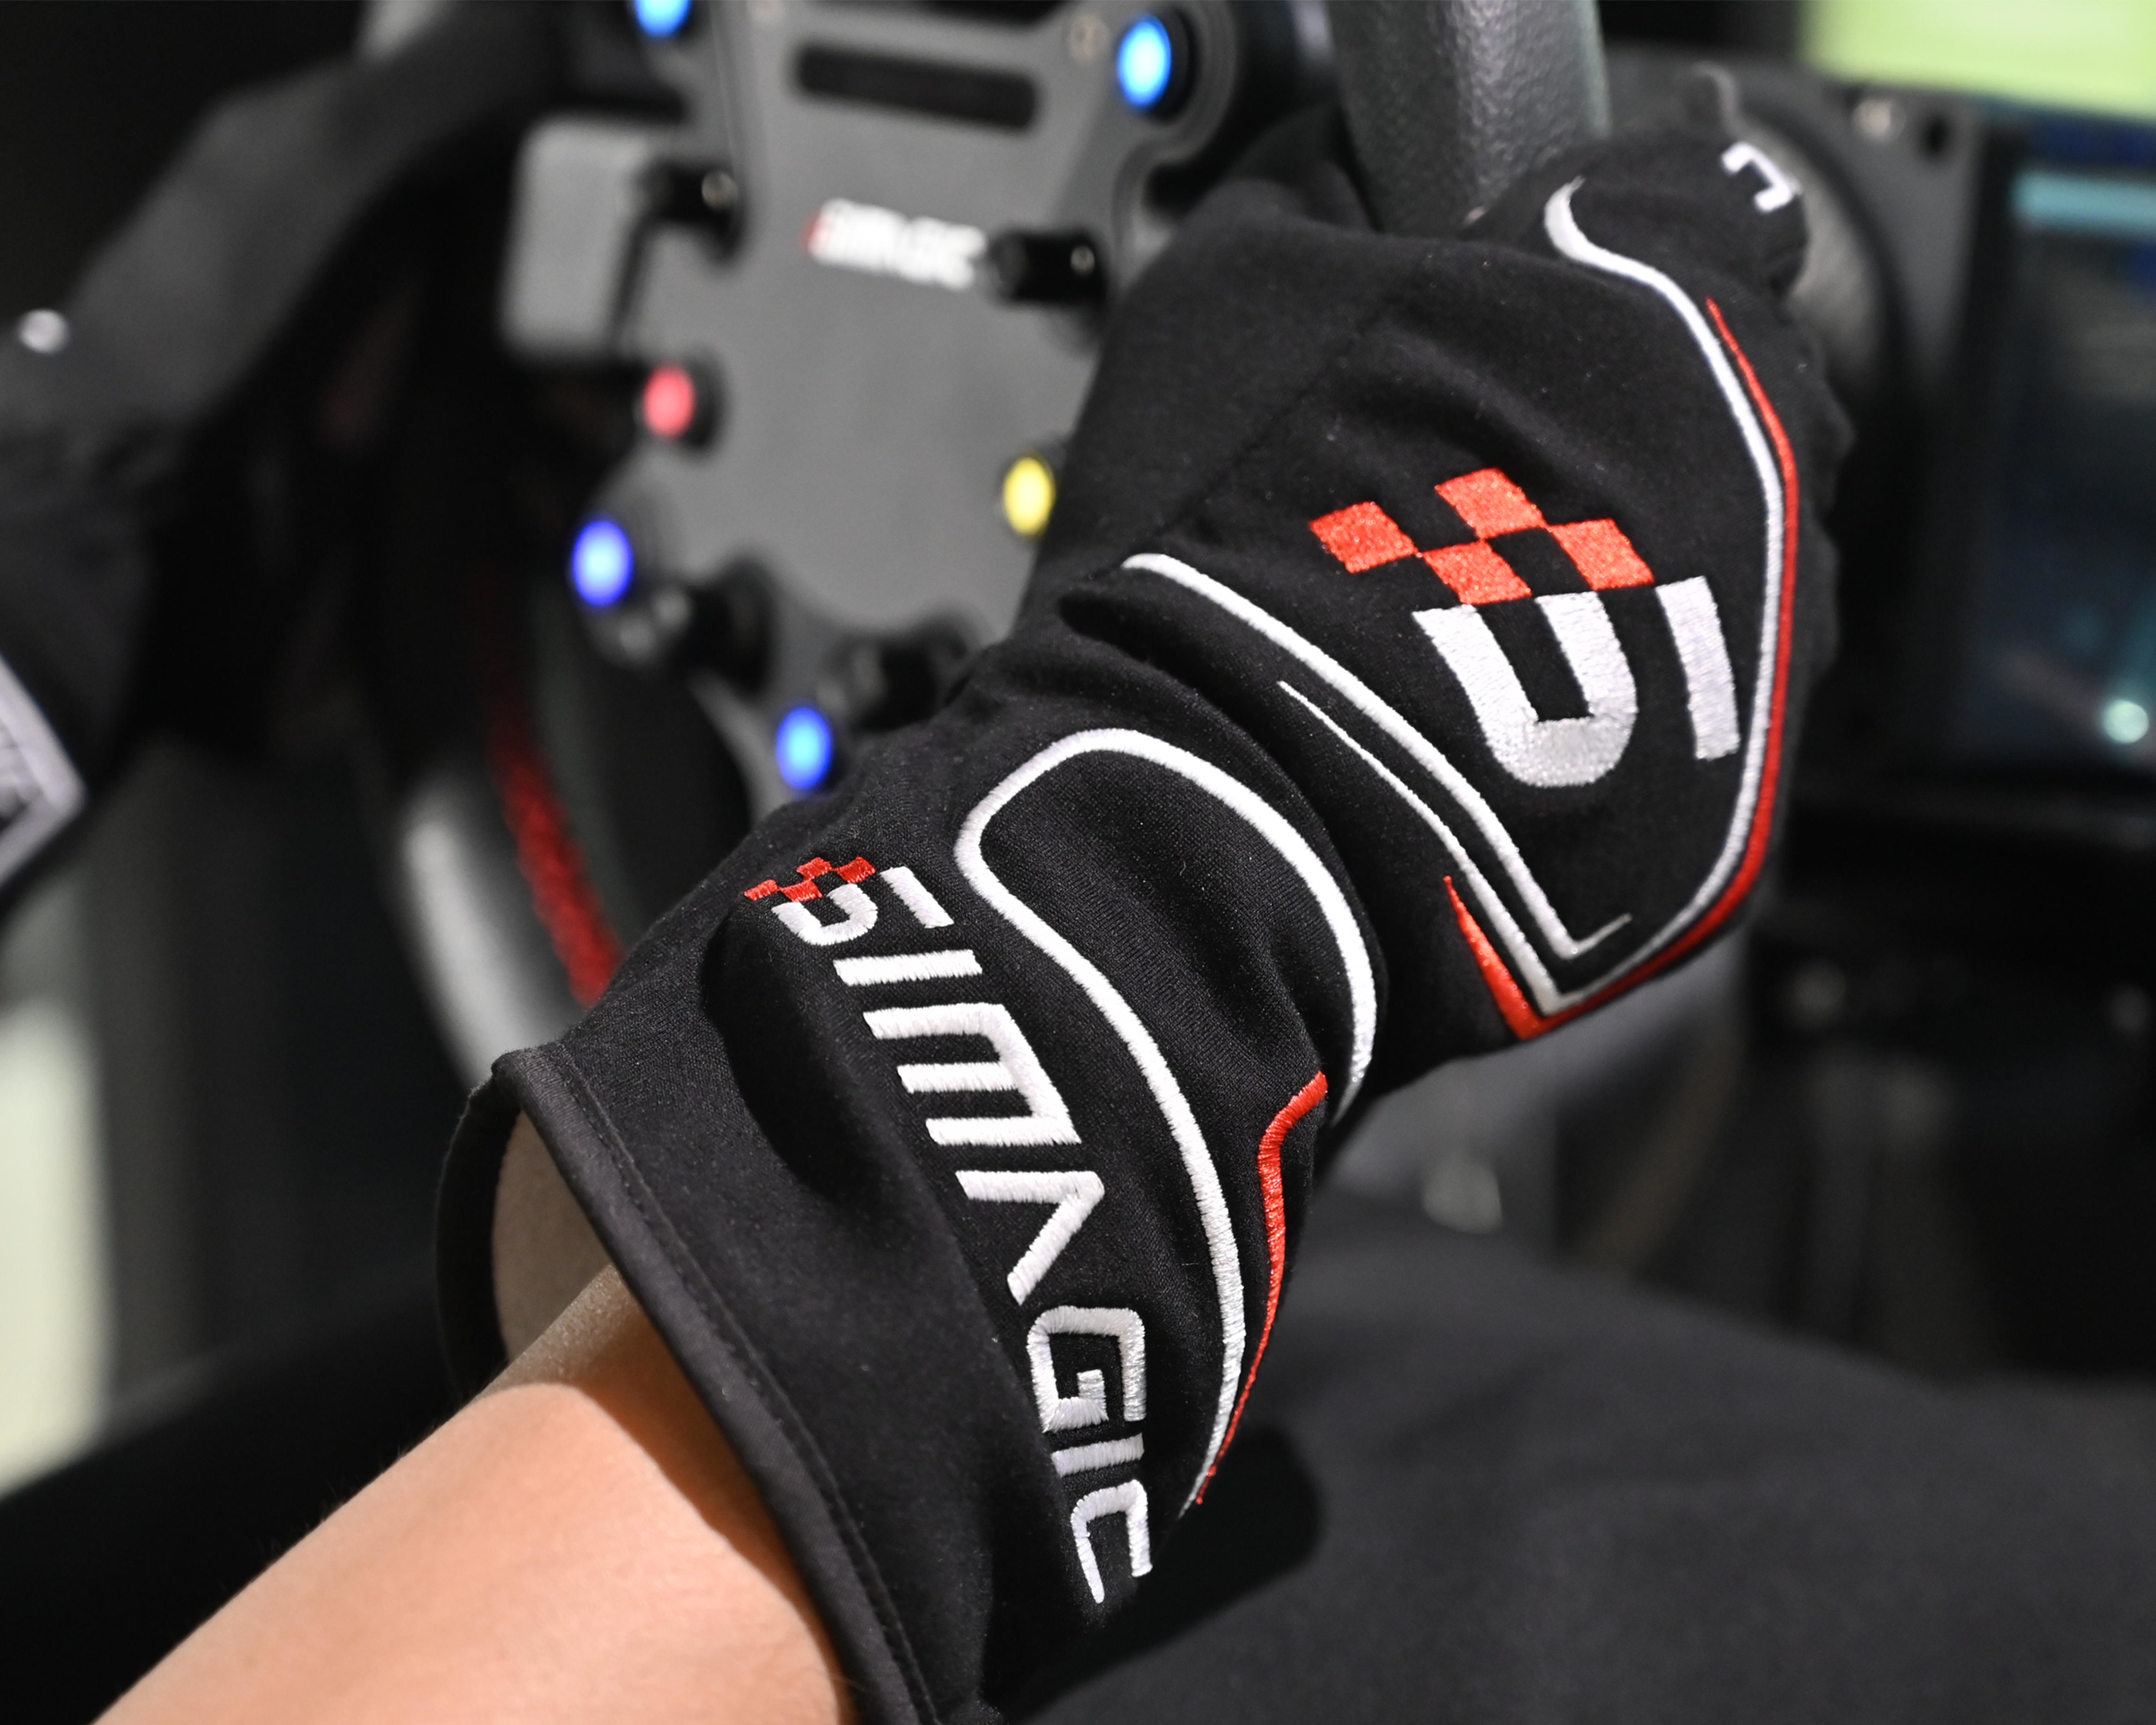 Simagic Accessories - Gloves, Direct Drive wheel base moutns, shifters, handbrakes and more - Apex Sim Racing